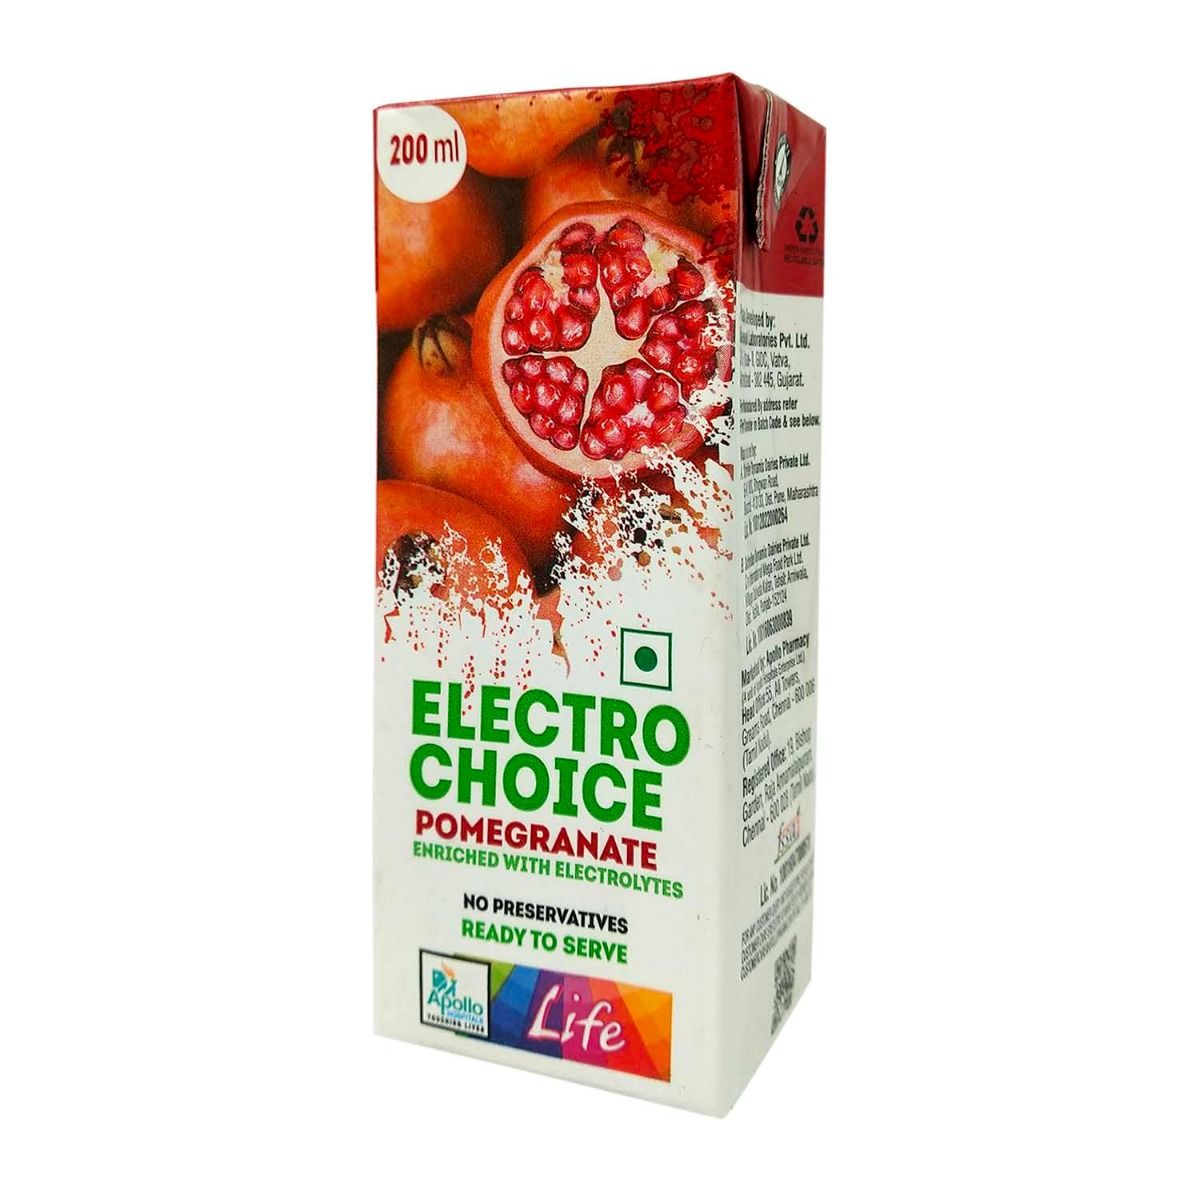 Apollo Life Electro Choice Pomegranate Flavour Drink, 200 ml, Pack of 1 